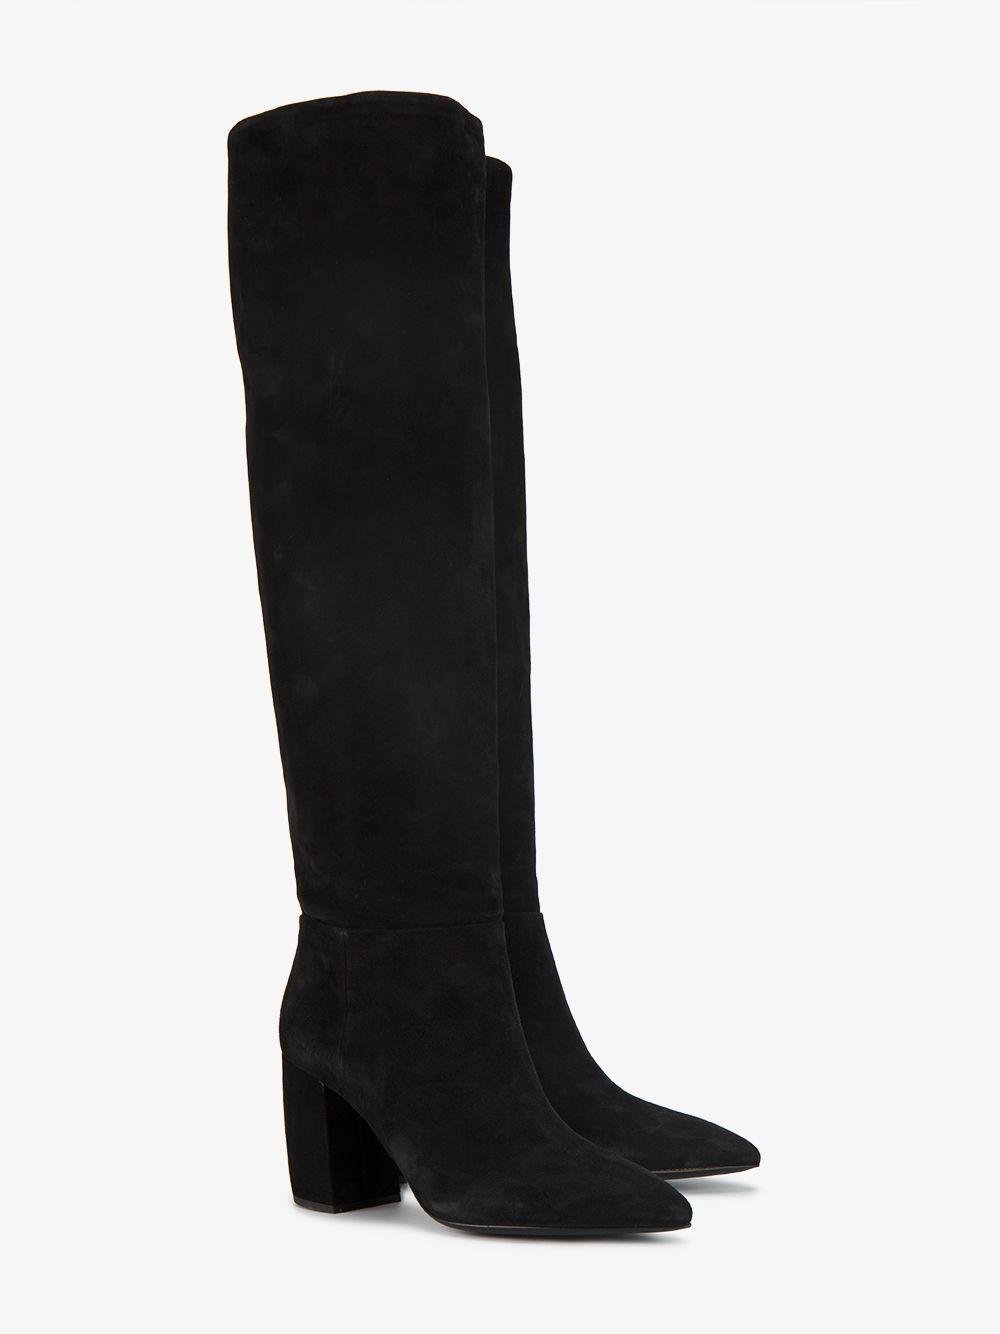 Prada Suede Slouch Knee High Boots in 